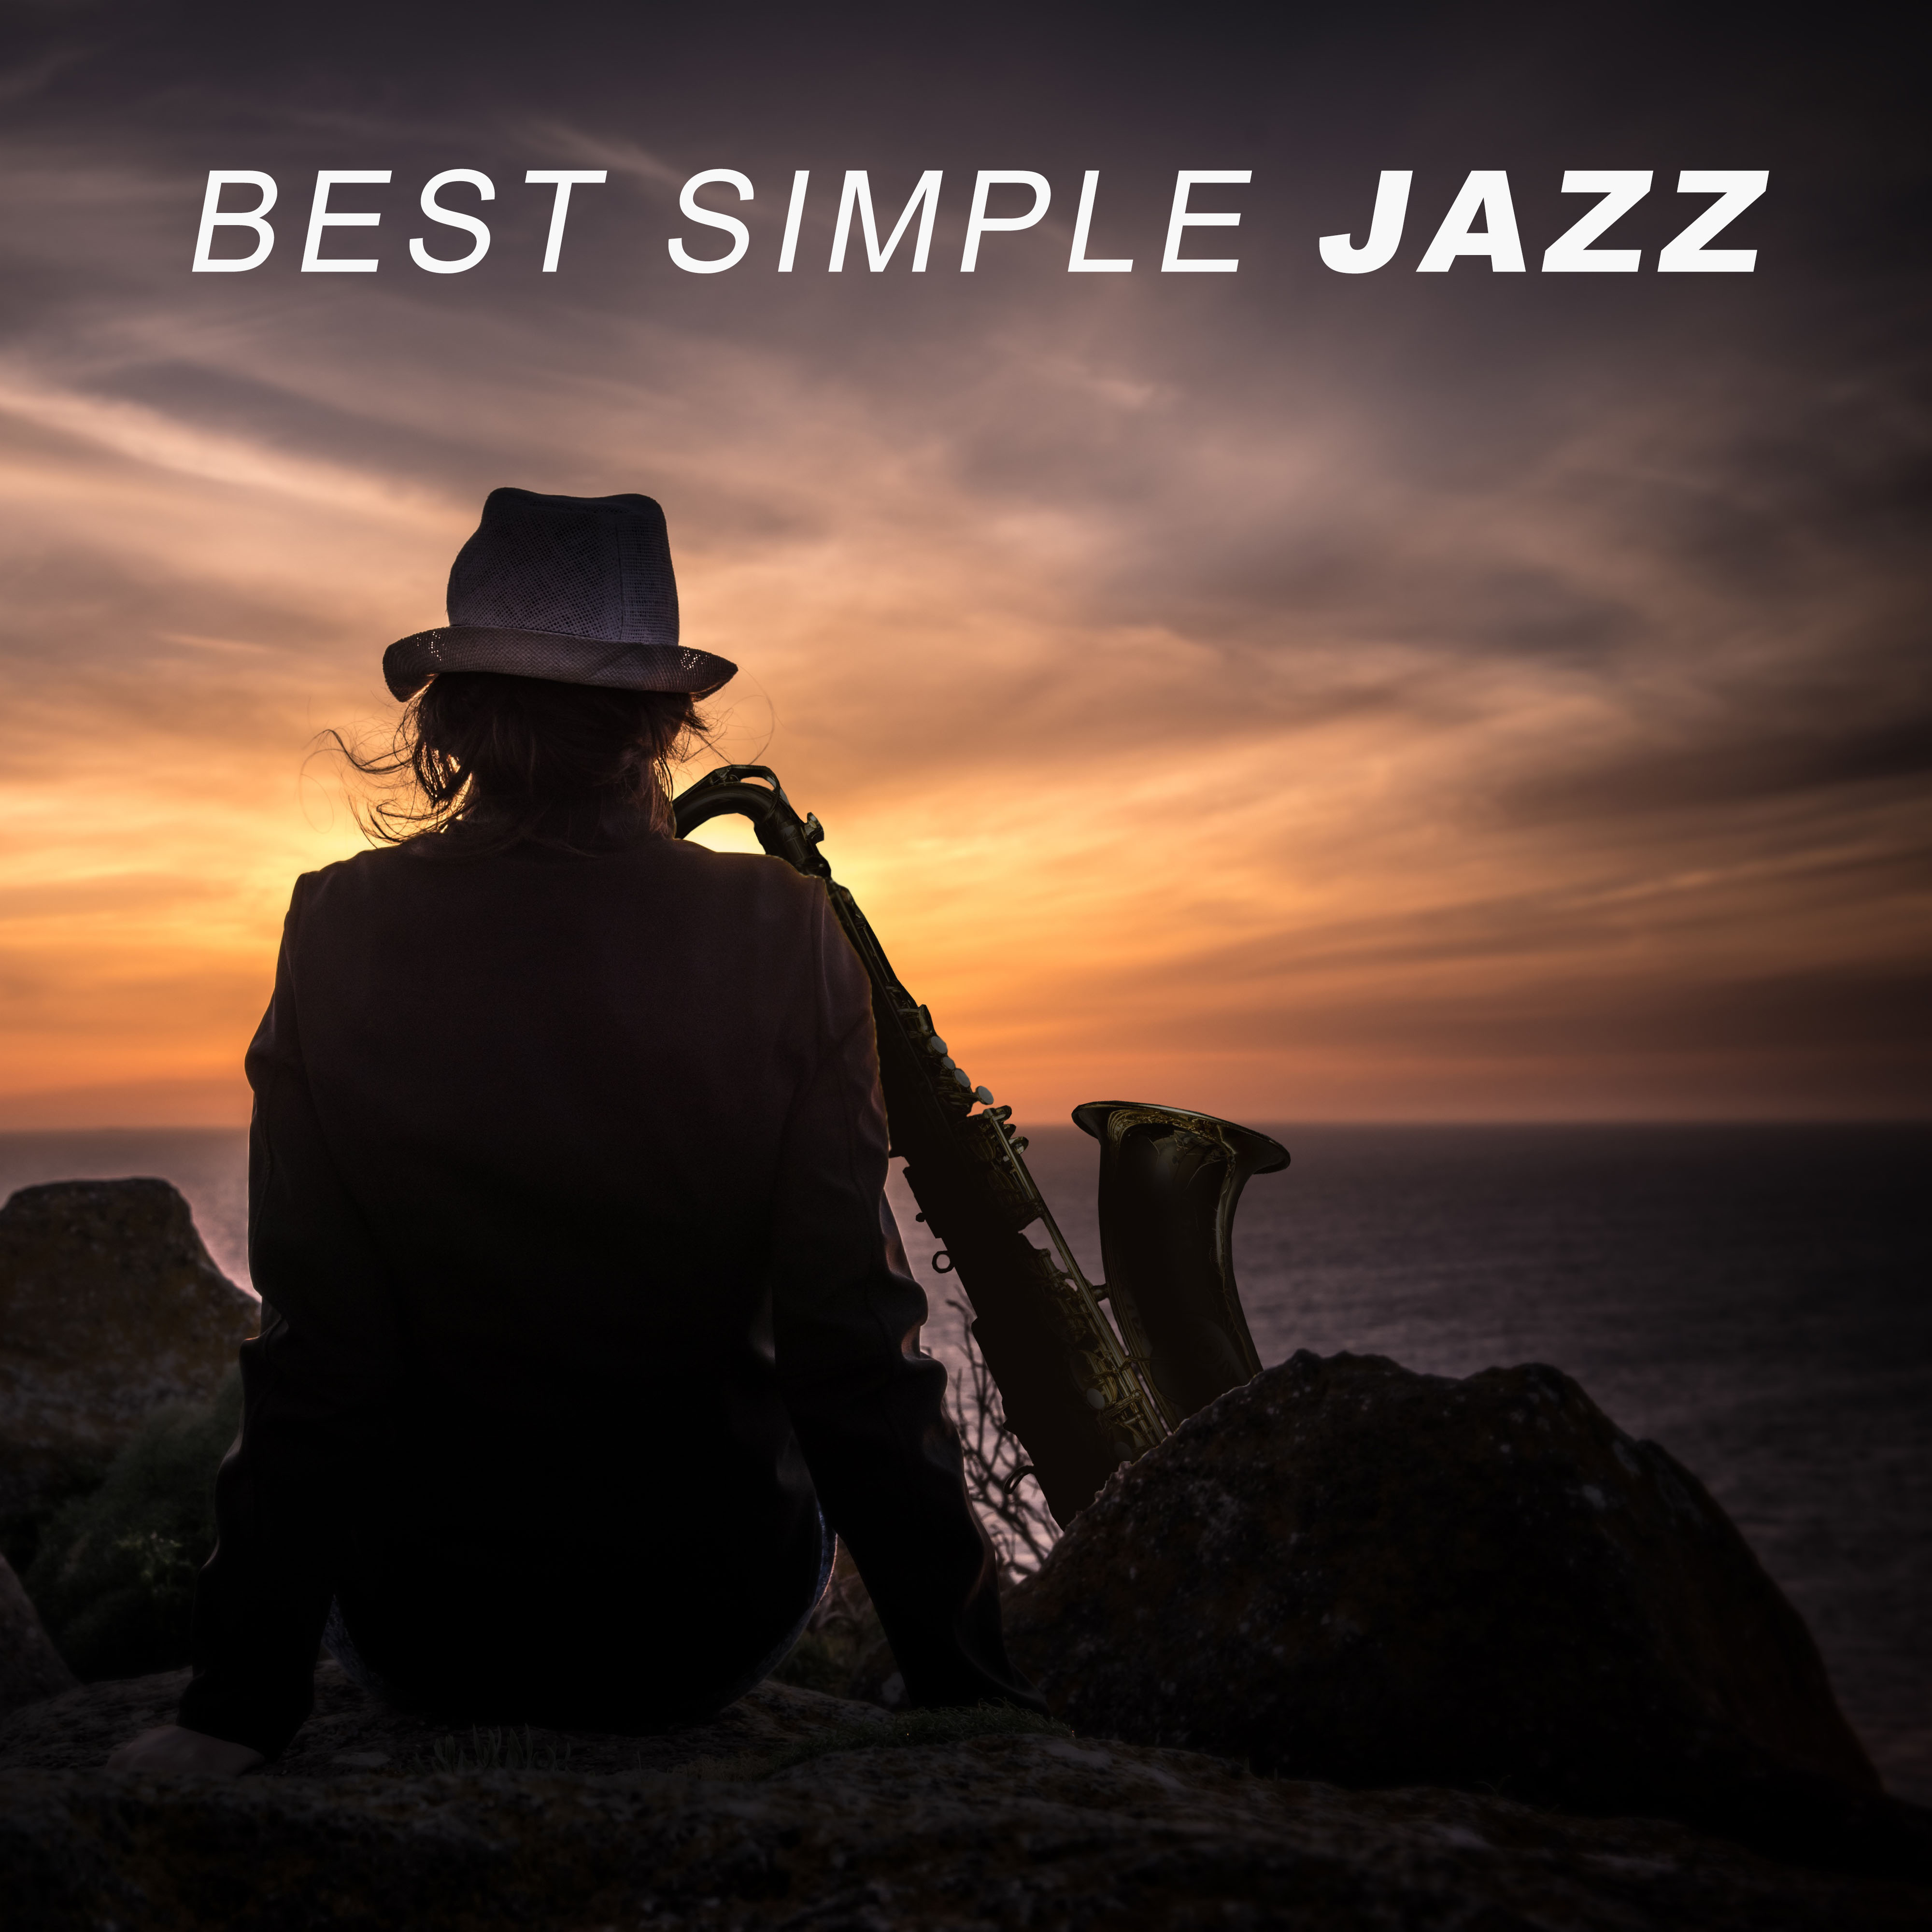 Best Simple Jazz  Instrumental Music Collection, French Restaurants, Deep Relaxation, Gentle Piano Melodies